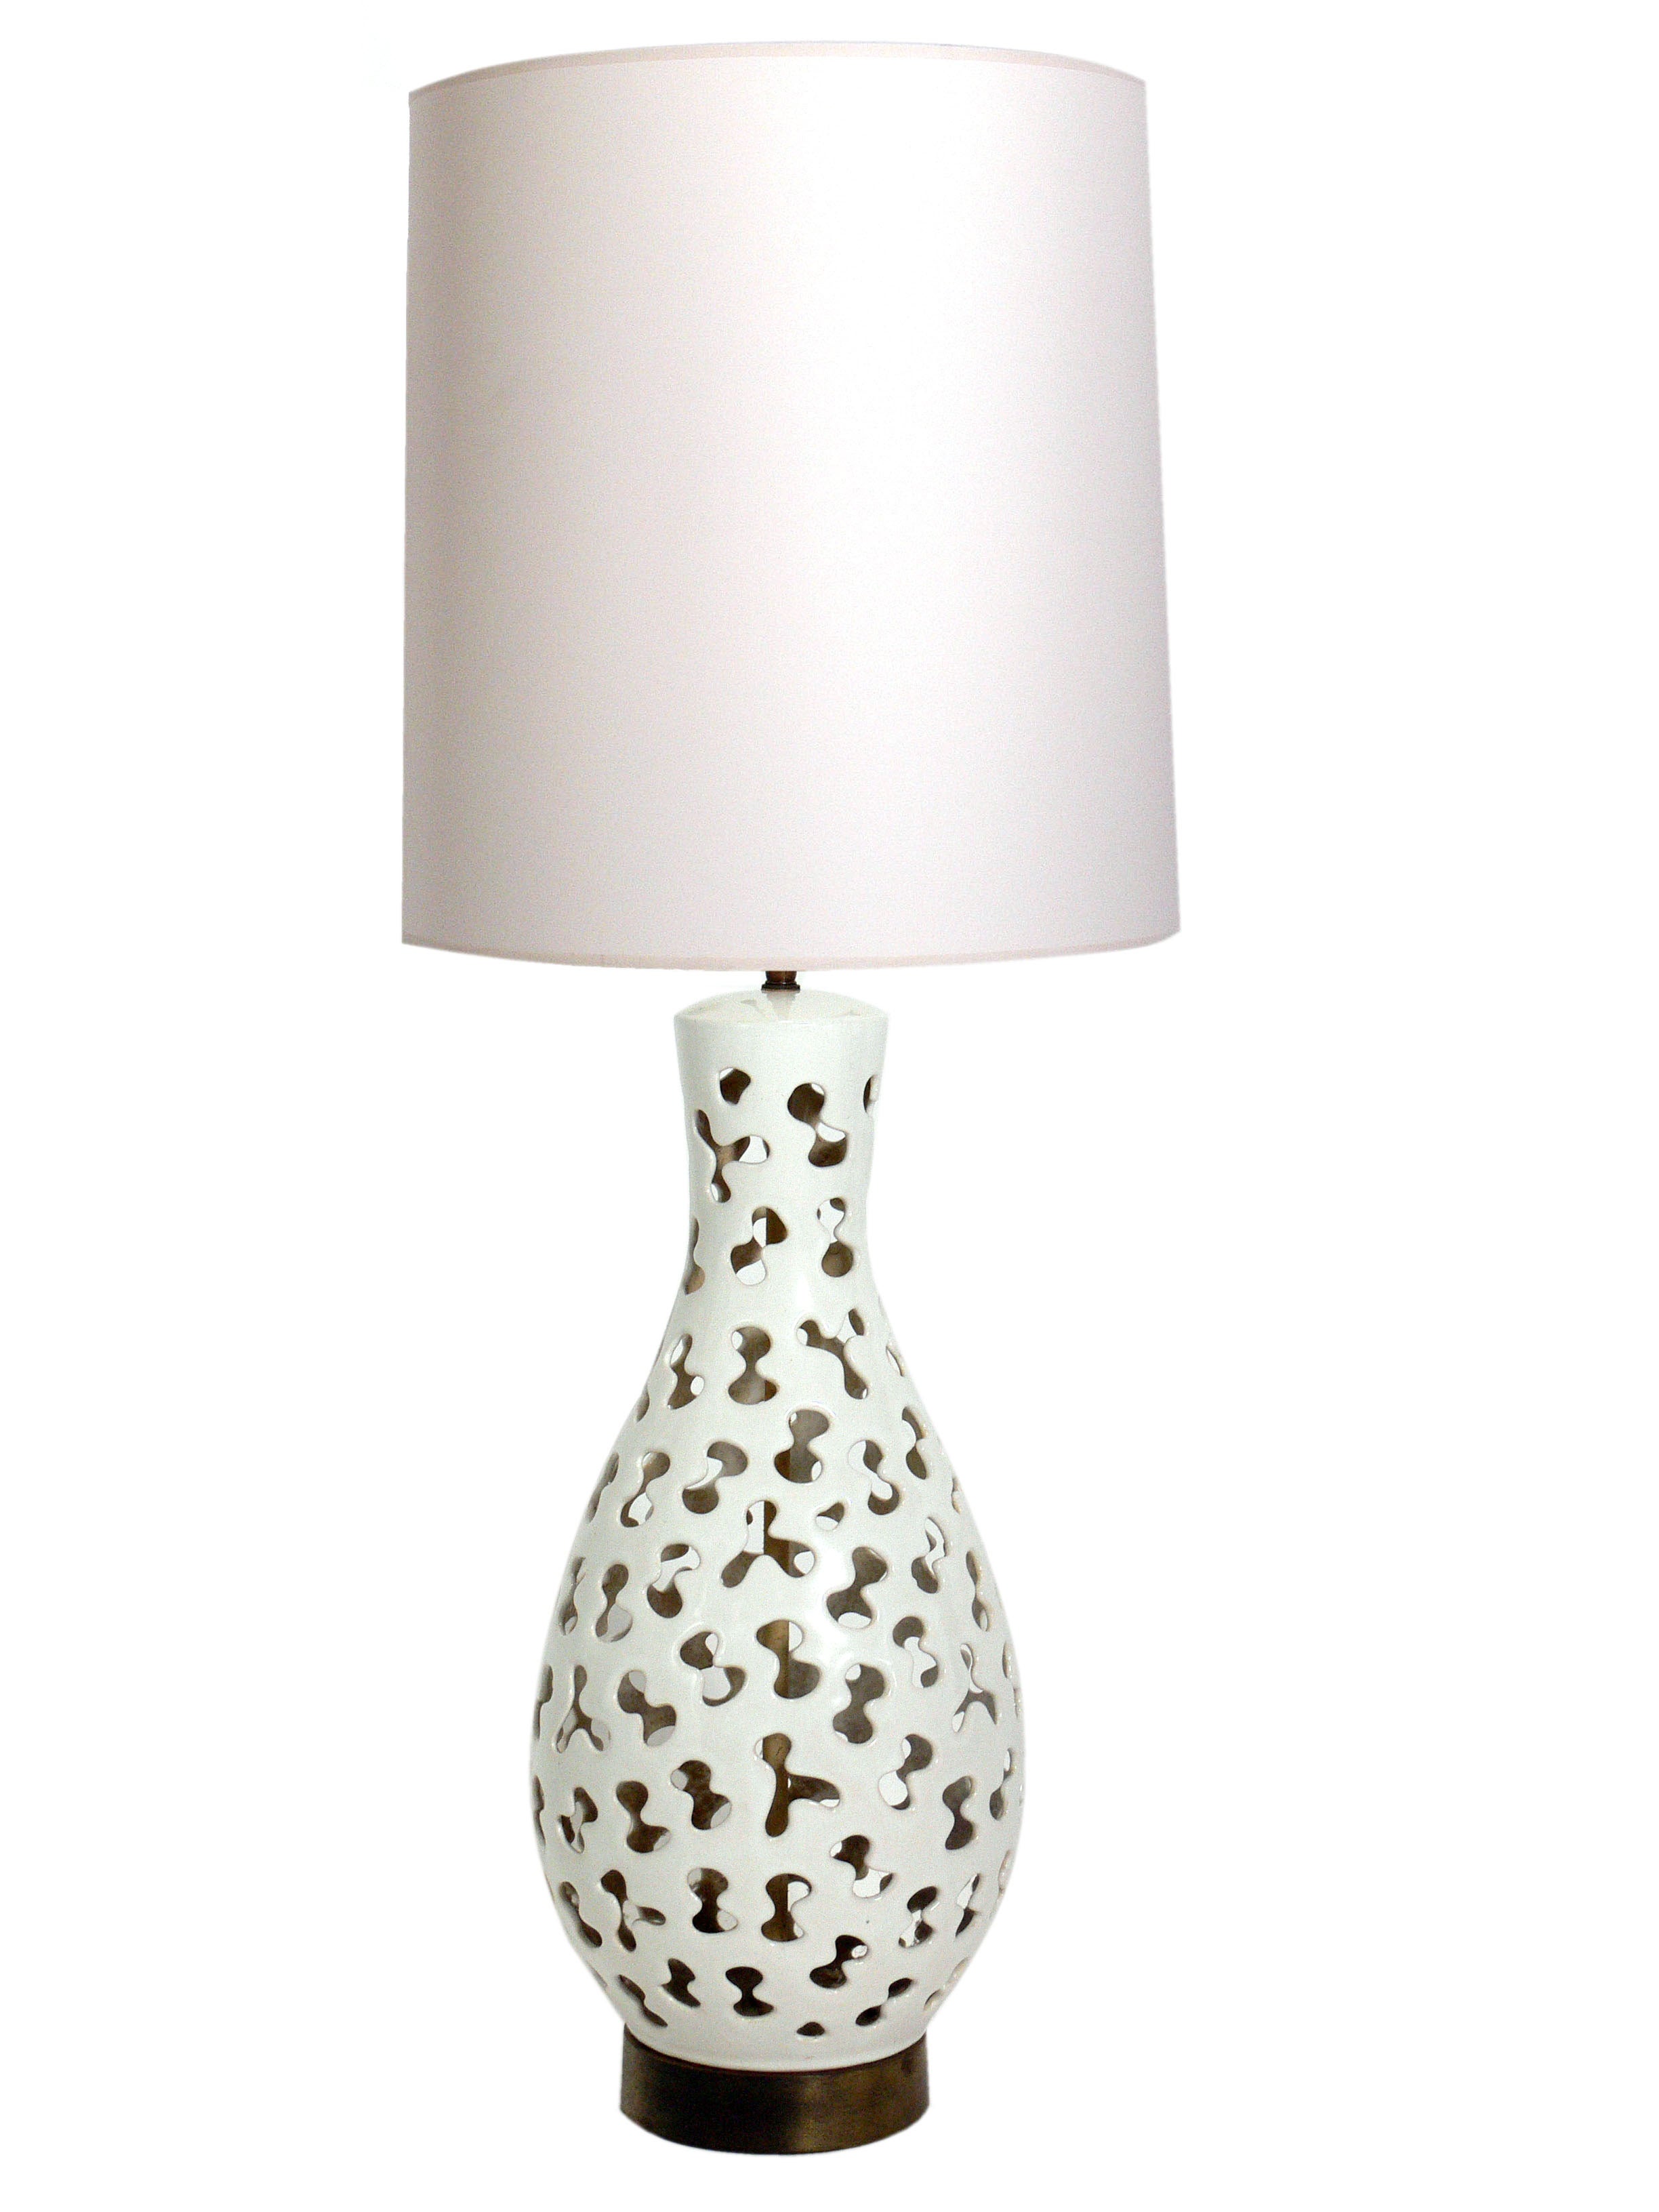 Large Sculptural Ceramic Lamp with Biomorphic Cut Outs For Sale